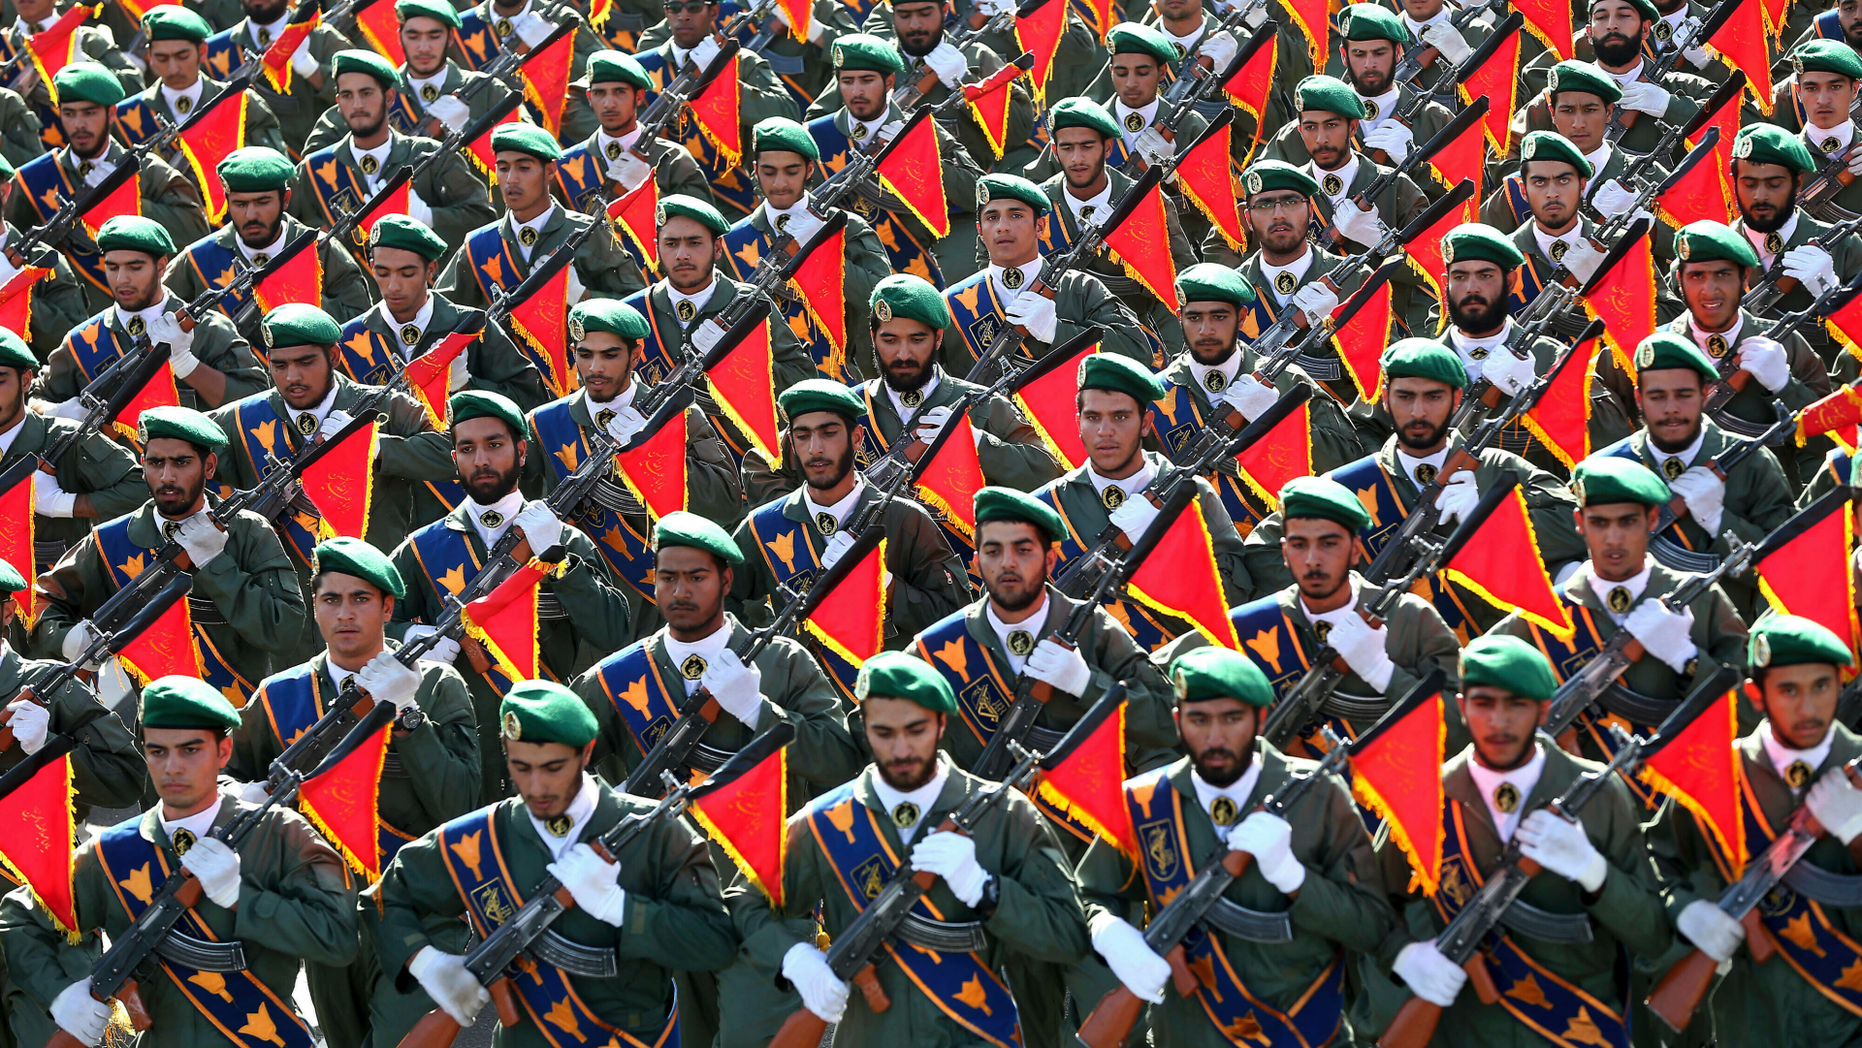 FILE - In this Sept. 21, 2016 file photo, Iran's Revolutionary Guard troops march in a military parade marking the 36th anniversary of Iraq's 1980 invasion of Iran, in front of the shrine of late revolutionary founder Ayatollah Khomeini, just outside Tehran, Iran. The Trump administration is preparing to designate Iran’s Revolutionary Guards Corps a “foreign terrorist organization” in an unprecedented move that could have widespread implications for U.S. personnel and policy. U.S. Officials say an announcement could come as early as Monday, April 8, 2019, following a months-long escalation in the administration’s rhetoric against Iran. The move would be the first such designation by any U.S. administration of an entire foreign government entity. (AP Photo/Ebrahim Noroozi, File)